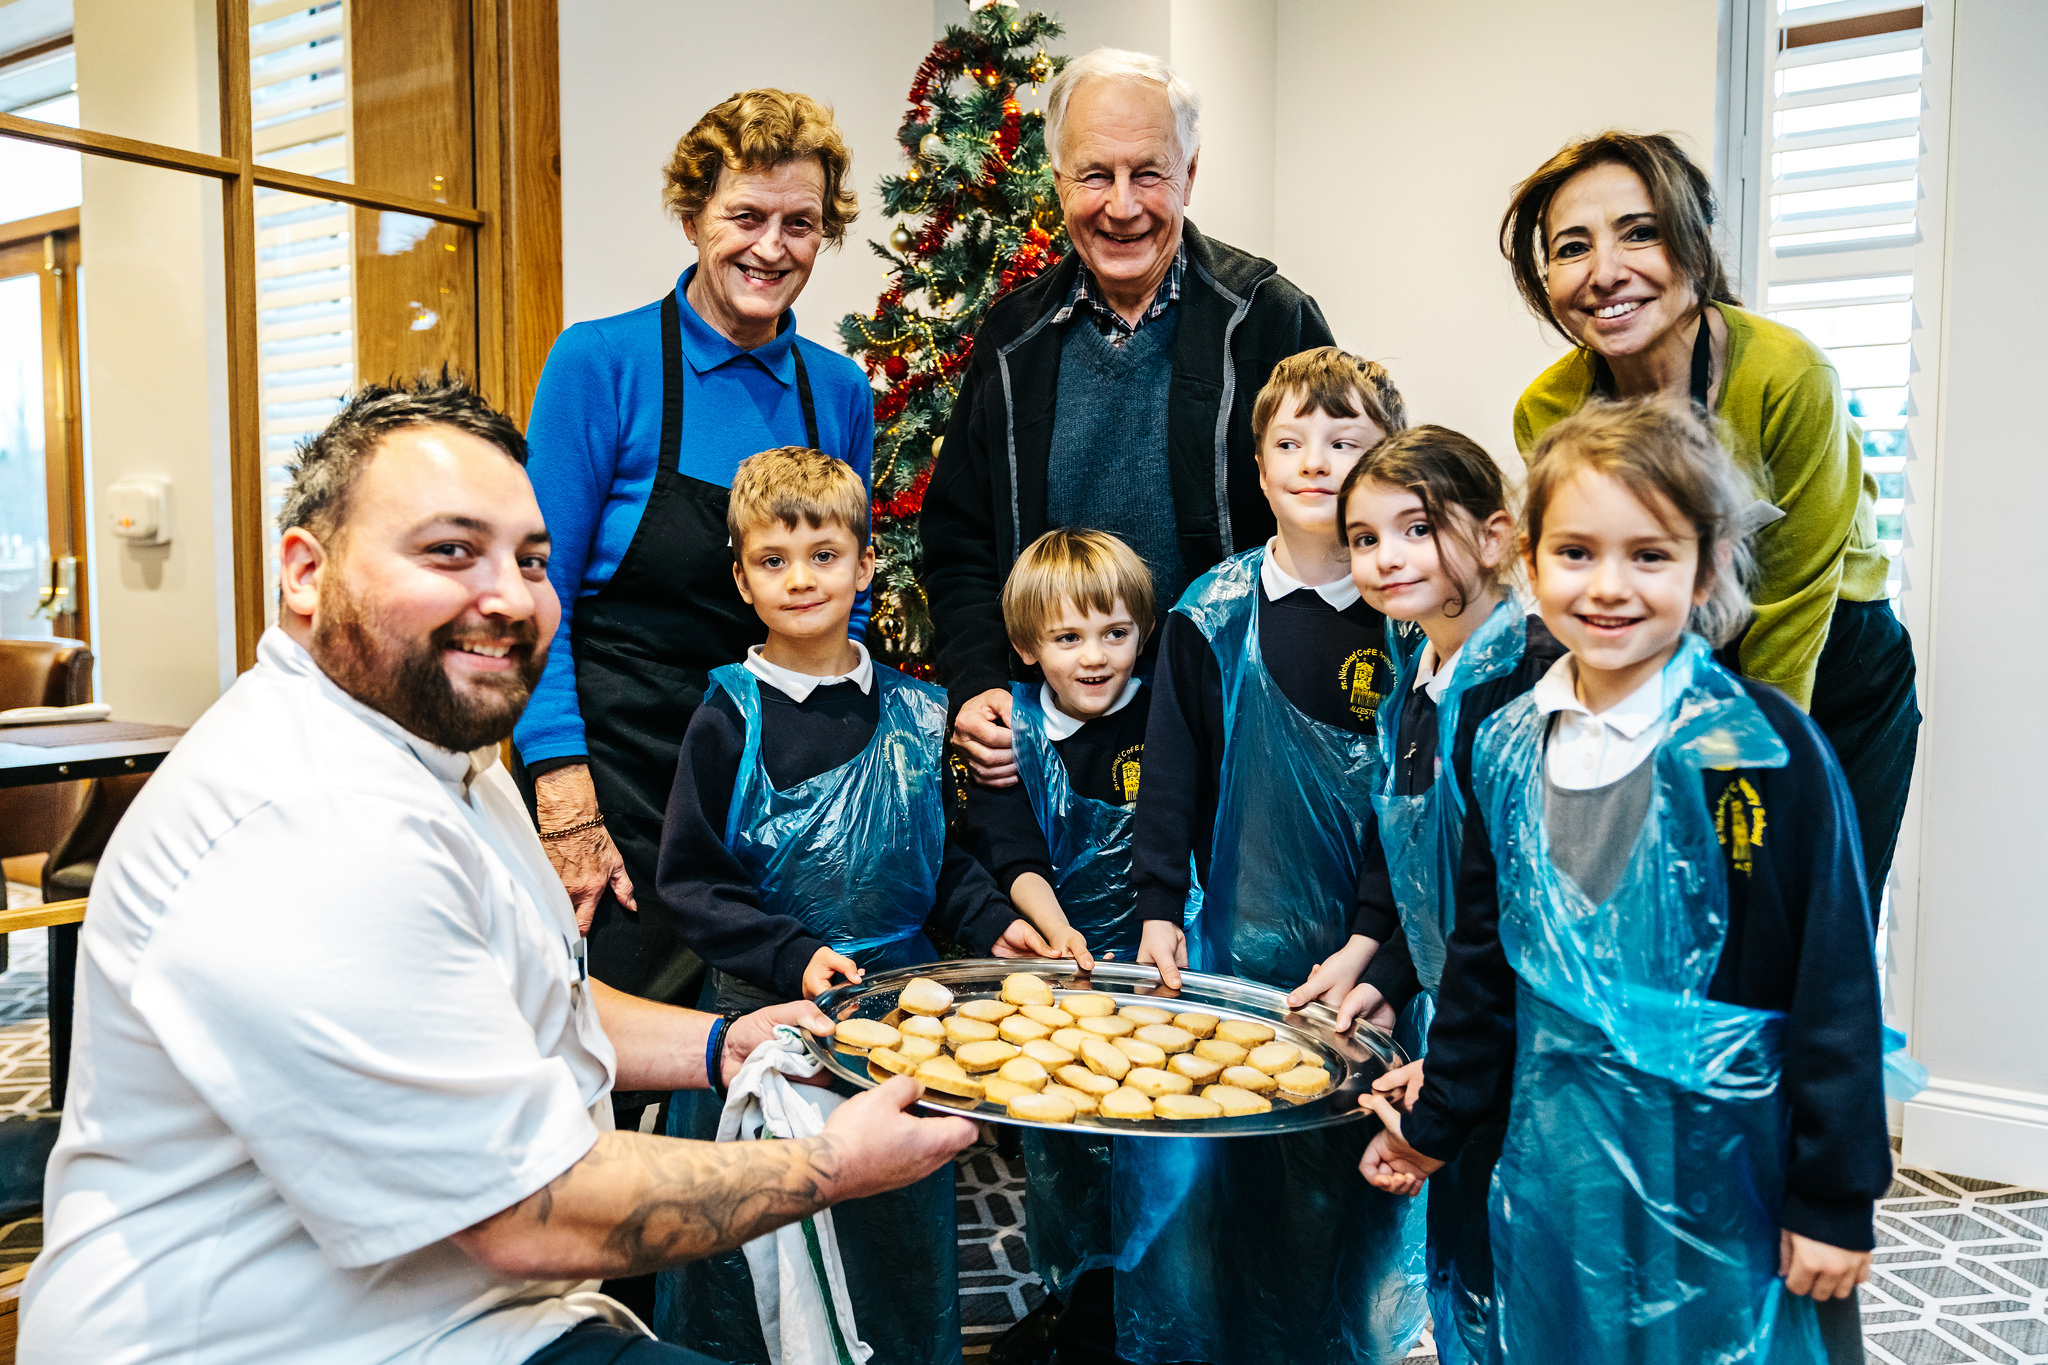 Chef teaches school children how to bake for retirement community's Christmas tea party